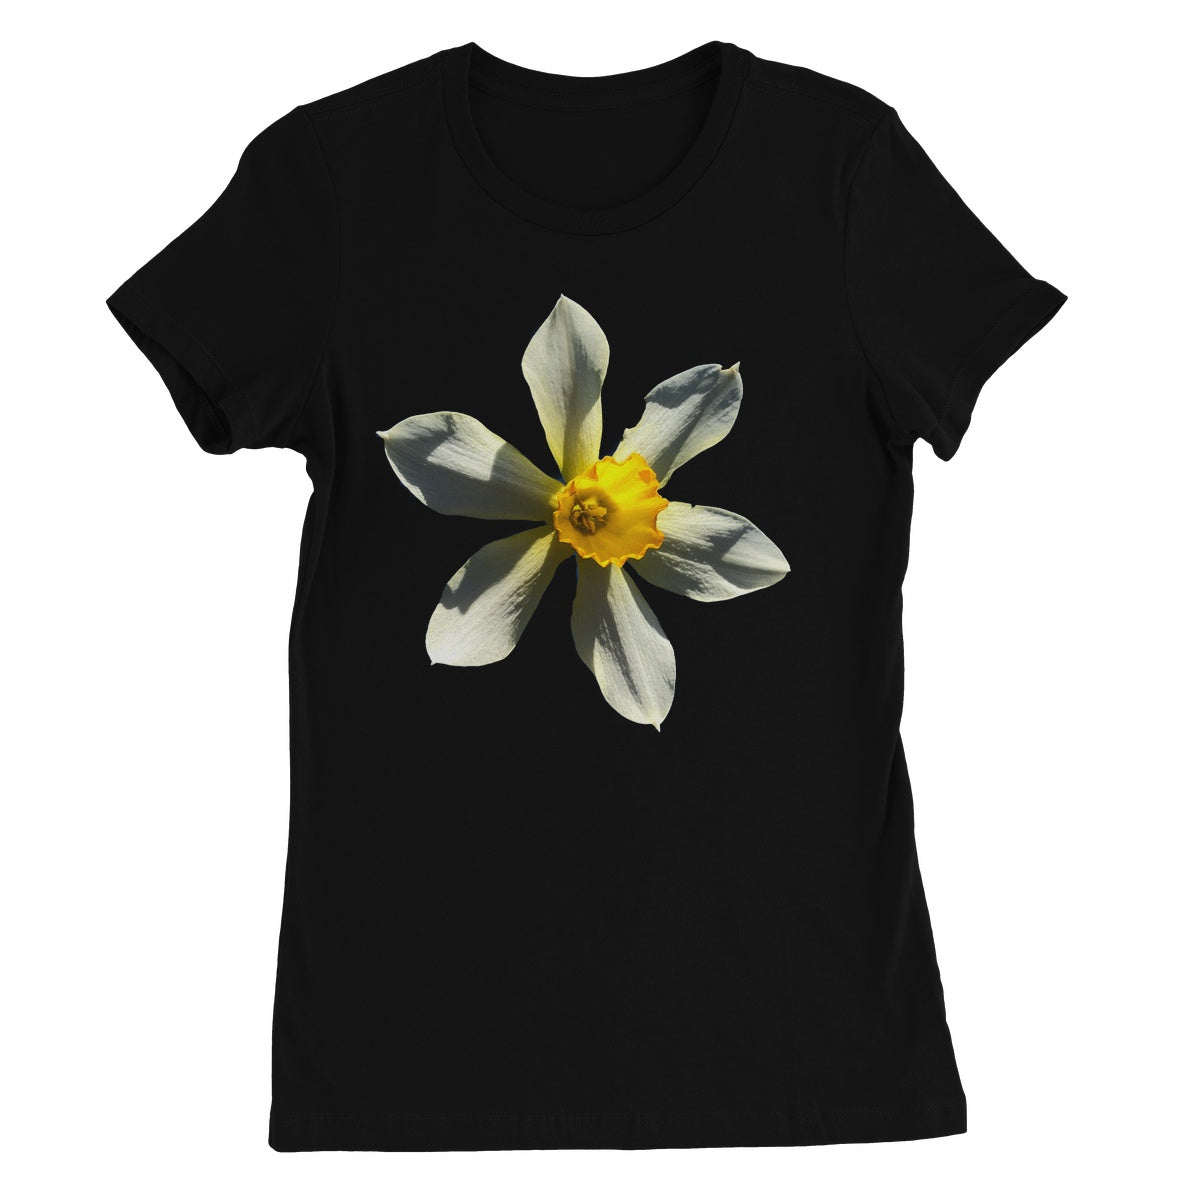 Daffodil Women's Favourite T-Shirt - Nature of Flowers